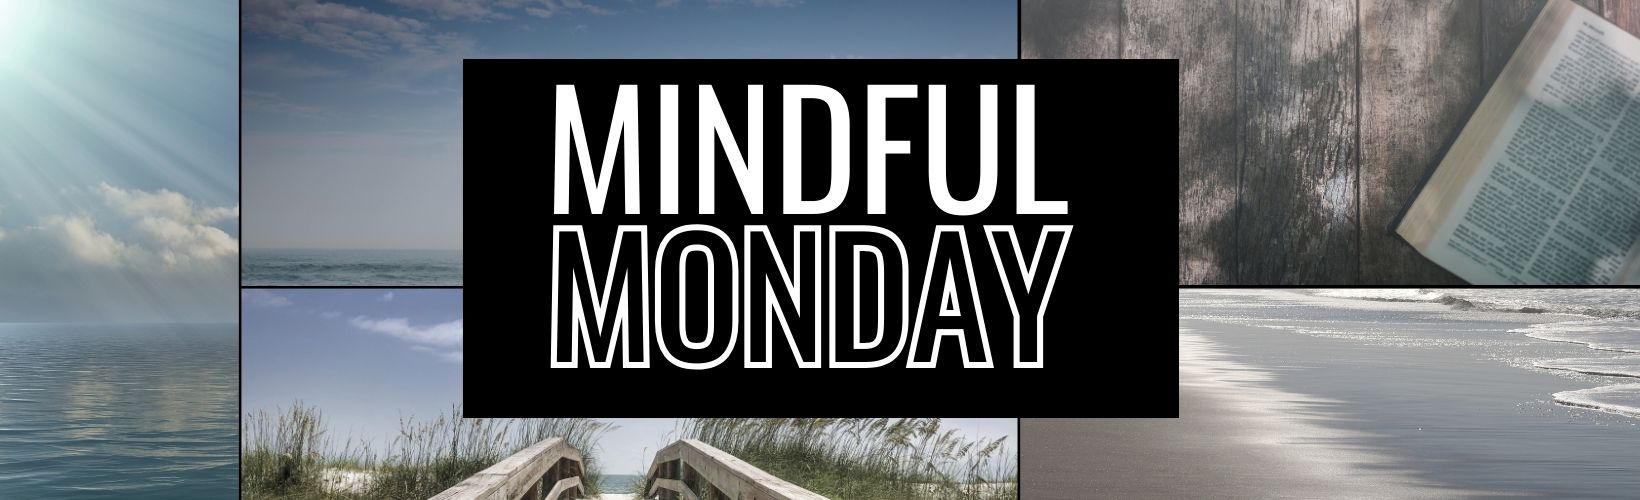 Mindful Monday: How to Practice Mindfulness at Work